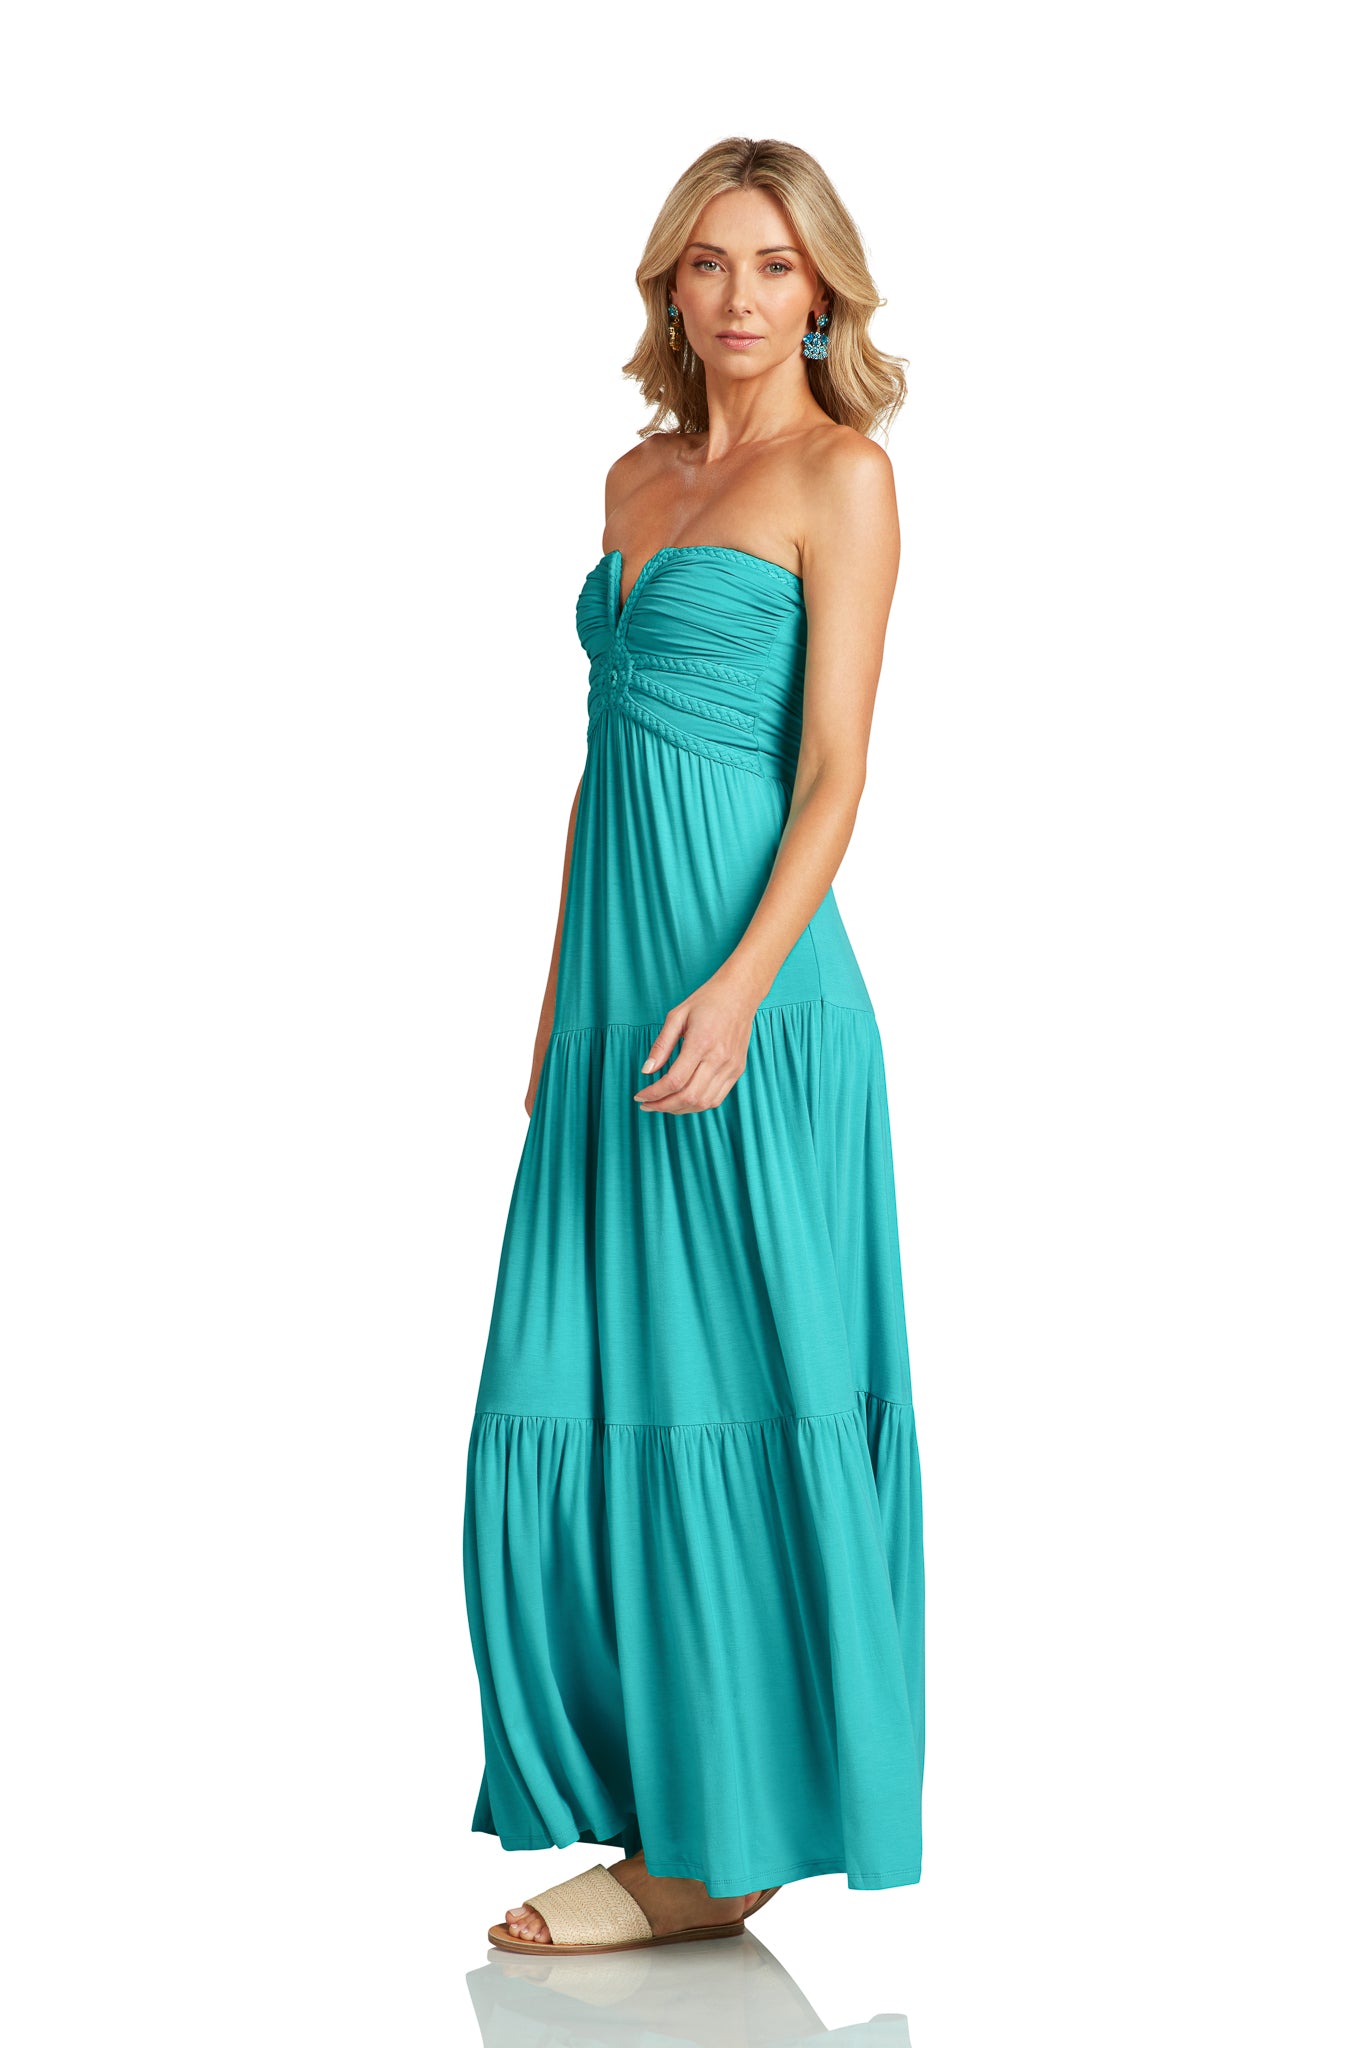 $99.99 DRESS EVENT LUCILLE MAXI DRESS TURQUOISE